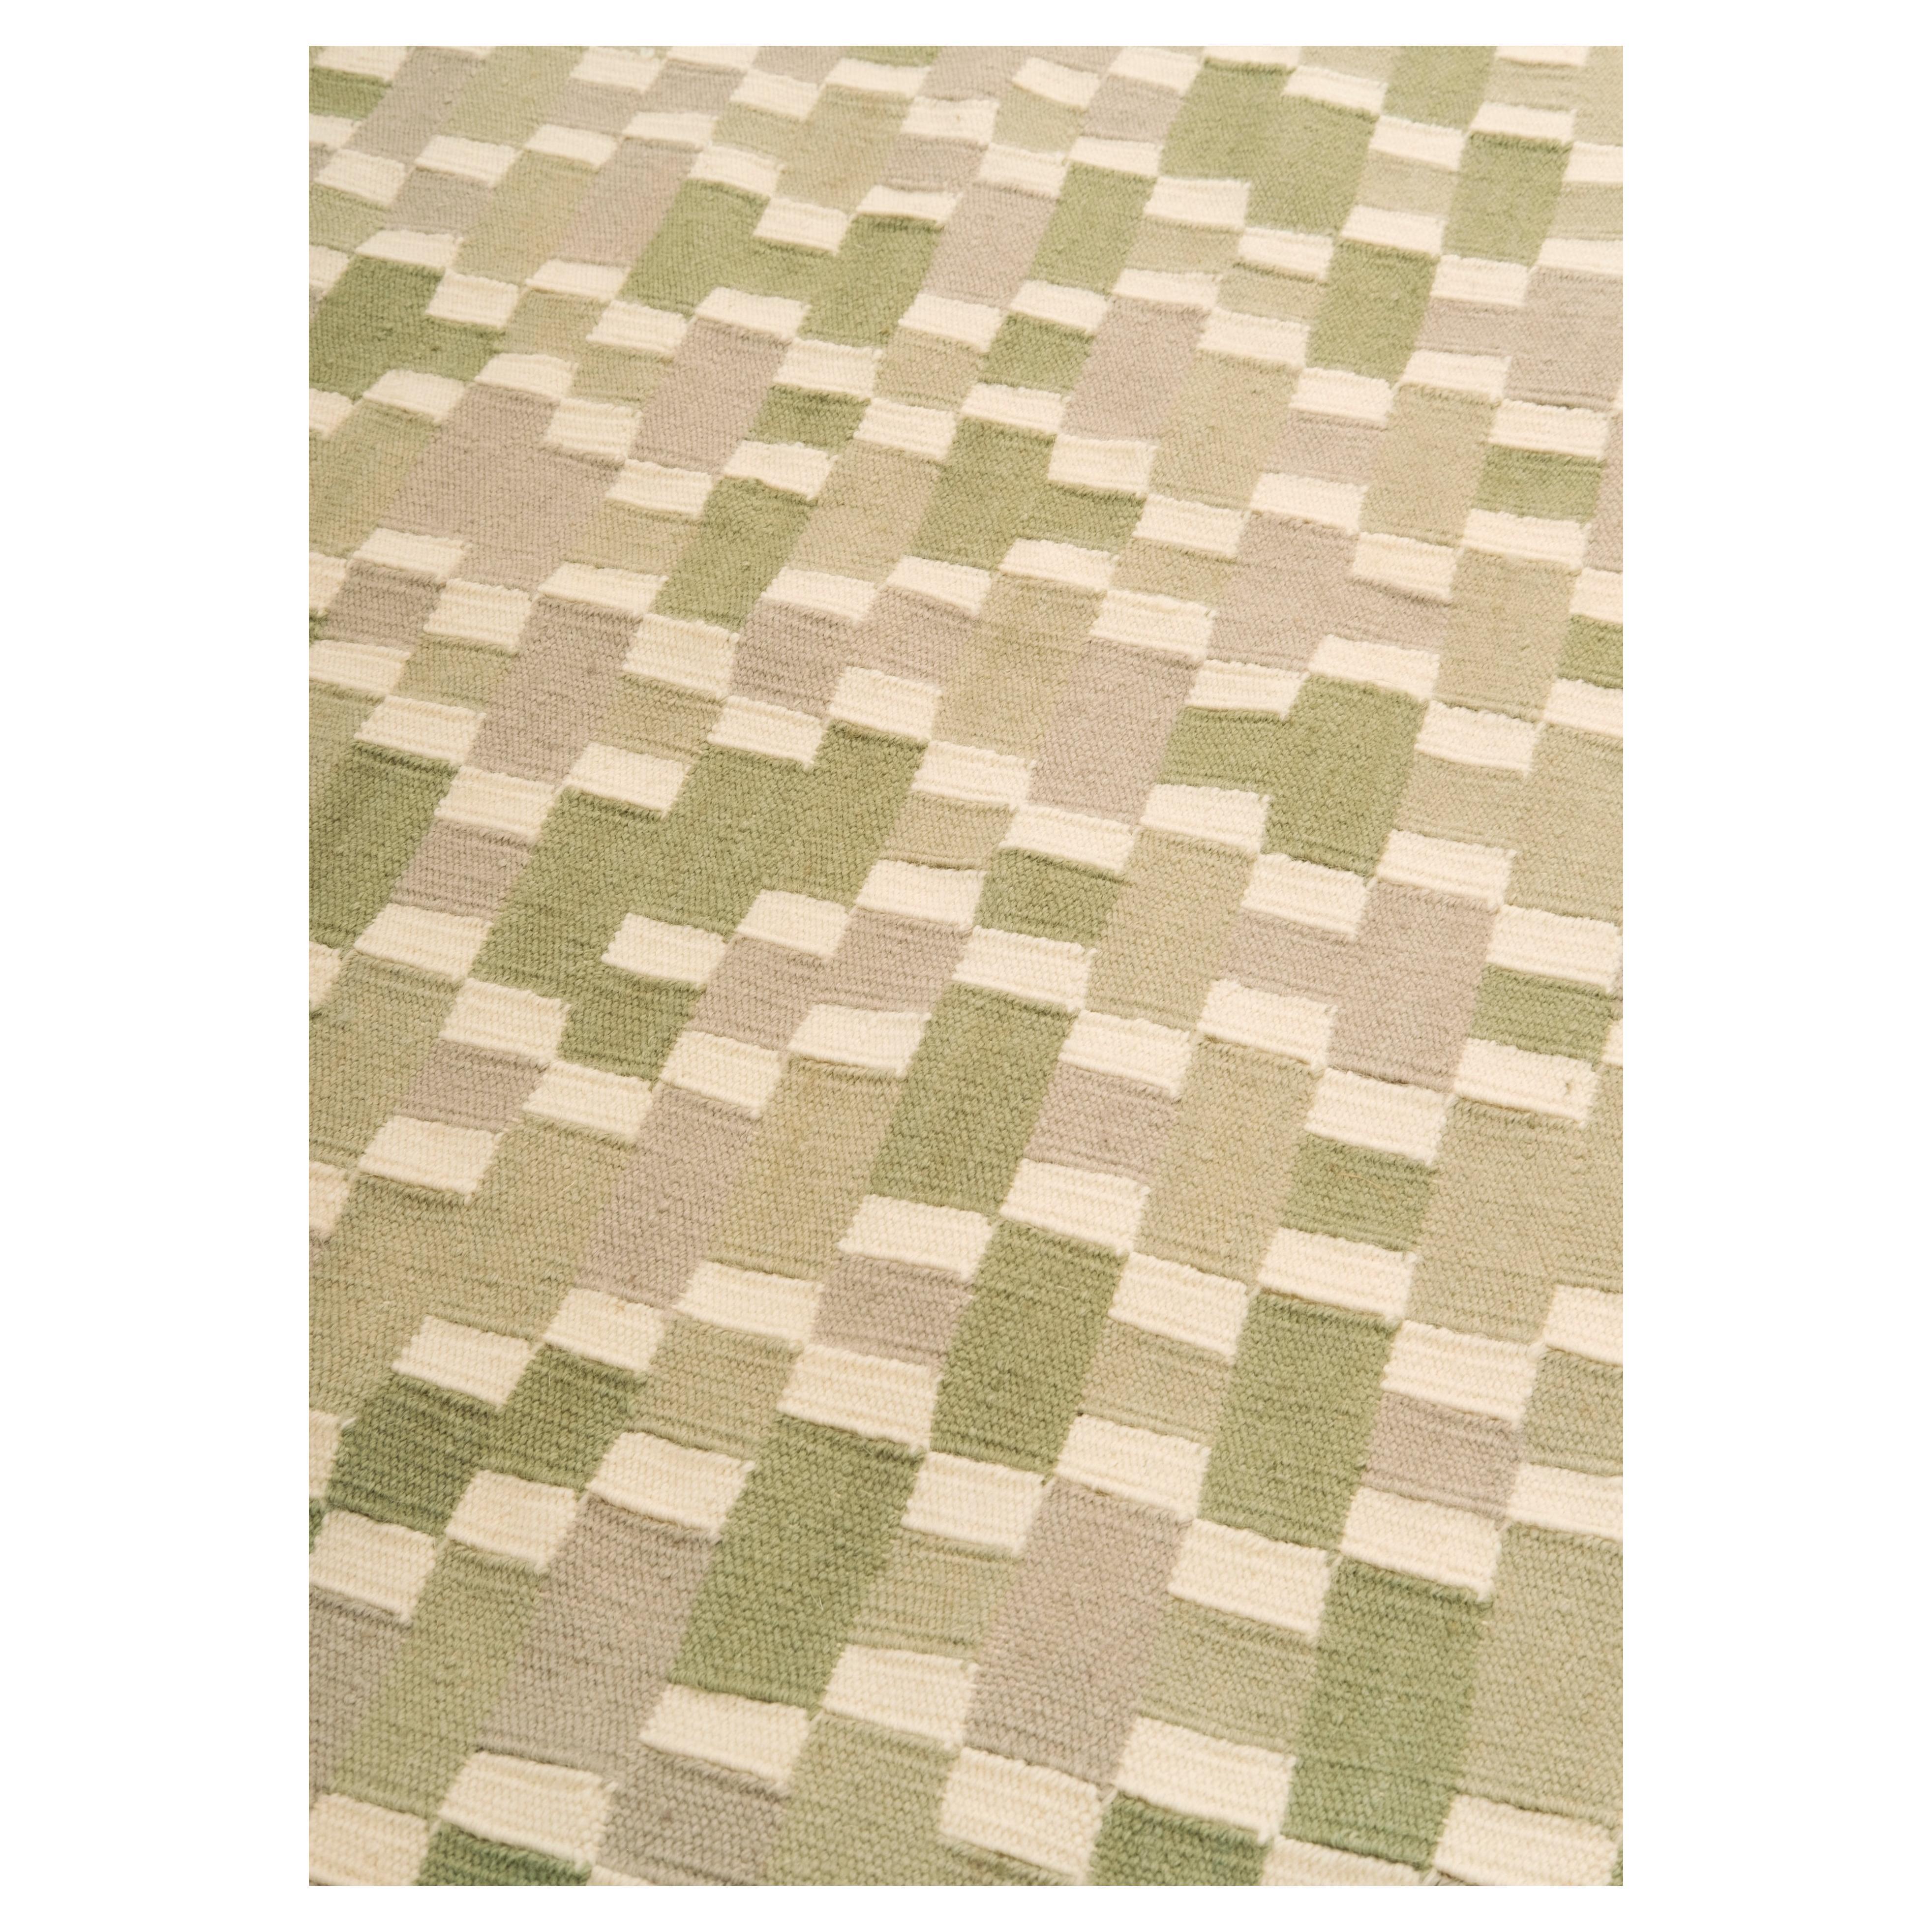 Tempo Cinque - Green

This Kilim rug is lightweight and breathable.
Available in stock, has been used once for a magazine photo shooting.

Woollen weave with geometrical motifs in a sophisticated colour combinations. The lightness of a traditional